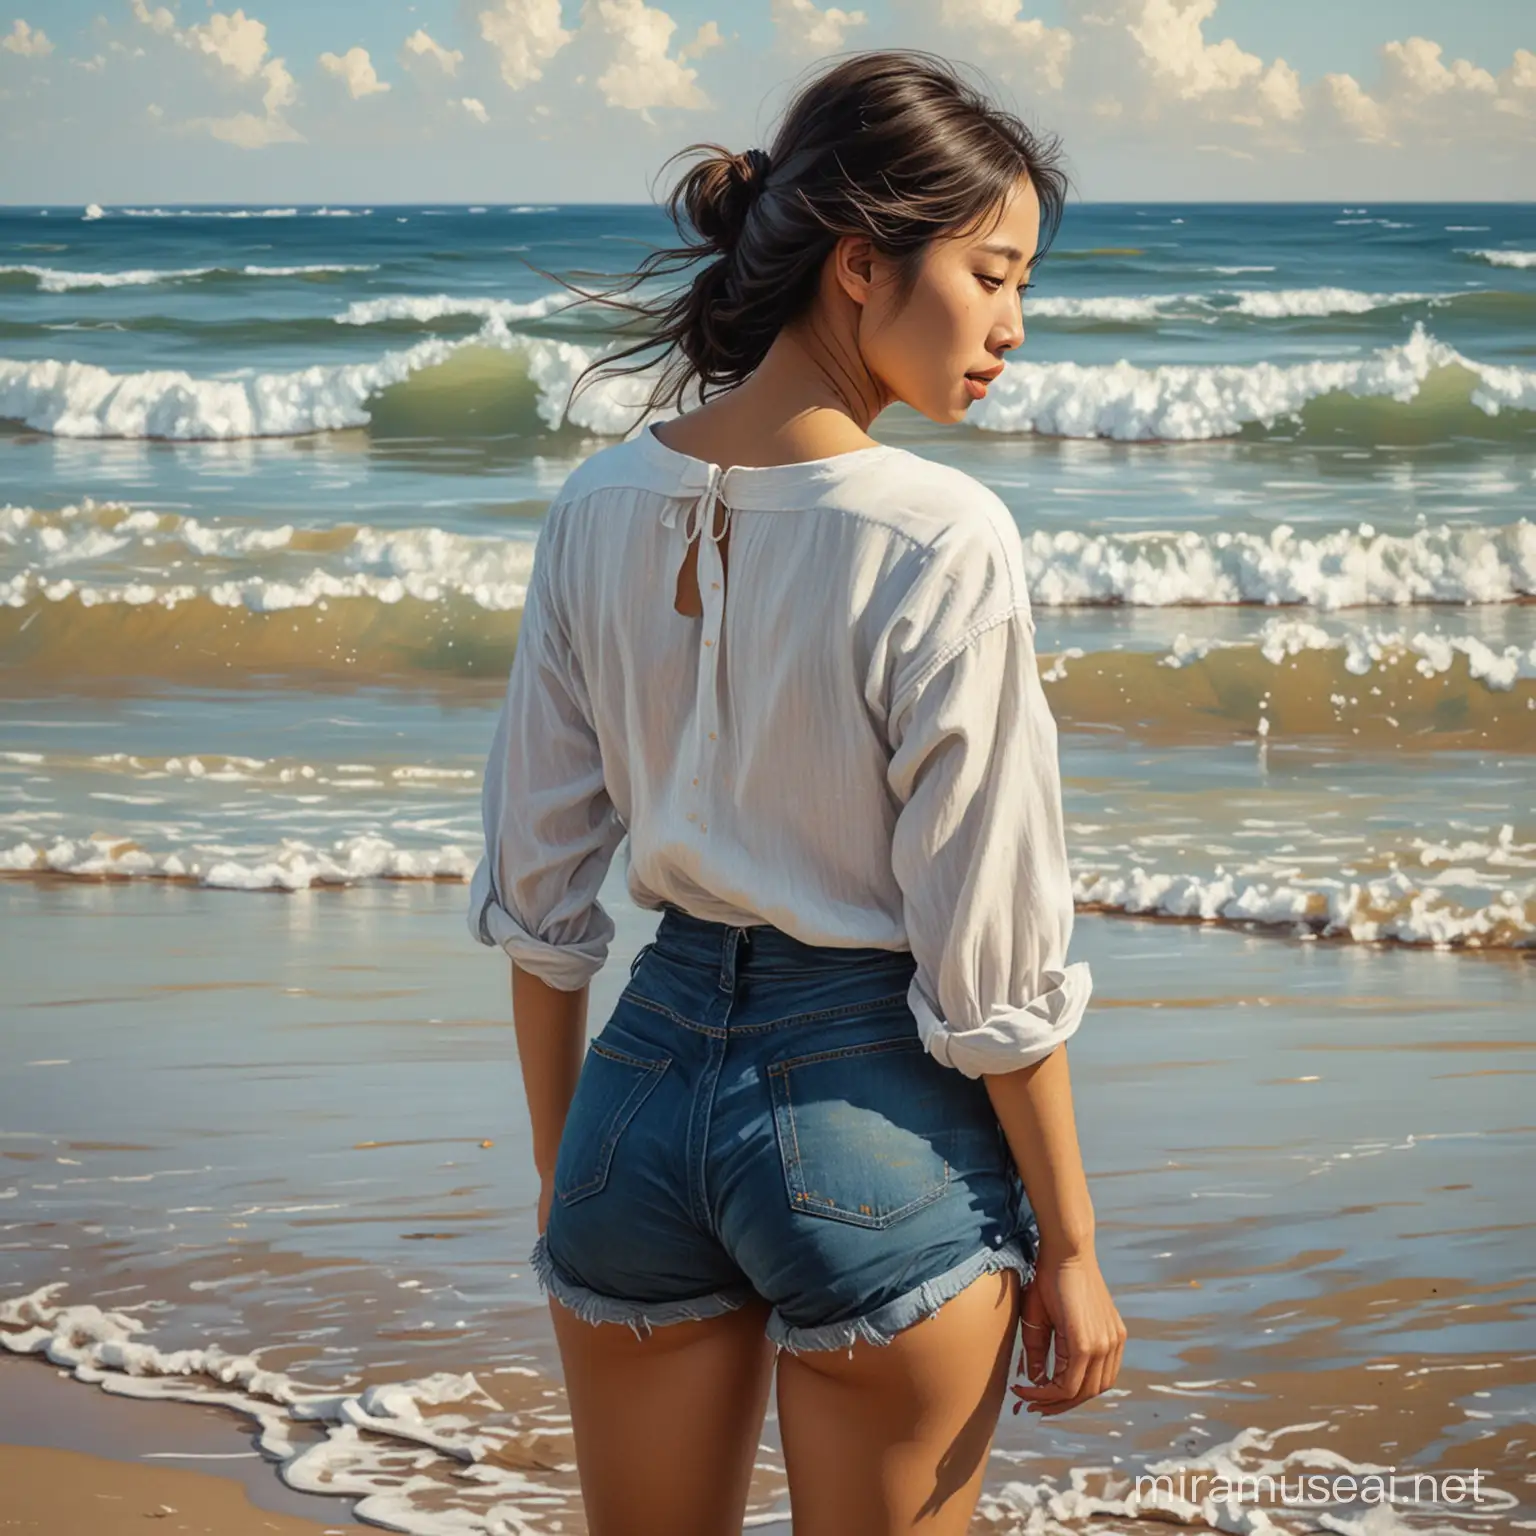 painting in style of Van Gogh of a young Chinese woman on beach with her back to the sea. Her face is heartbreakingly beautiful. She wears jean shorts and a white shirt. Her dark complexion suggests a gypsy spirit. She is obviously high-spirited. her feet are shown in the water
